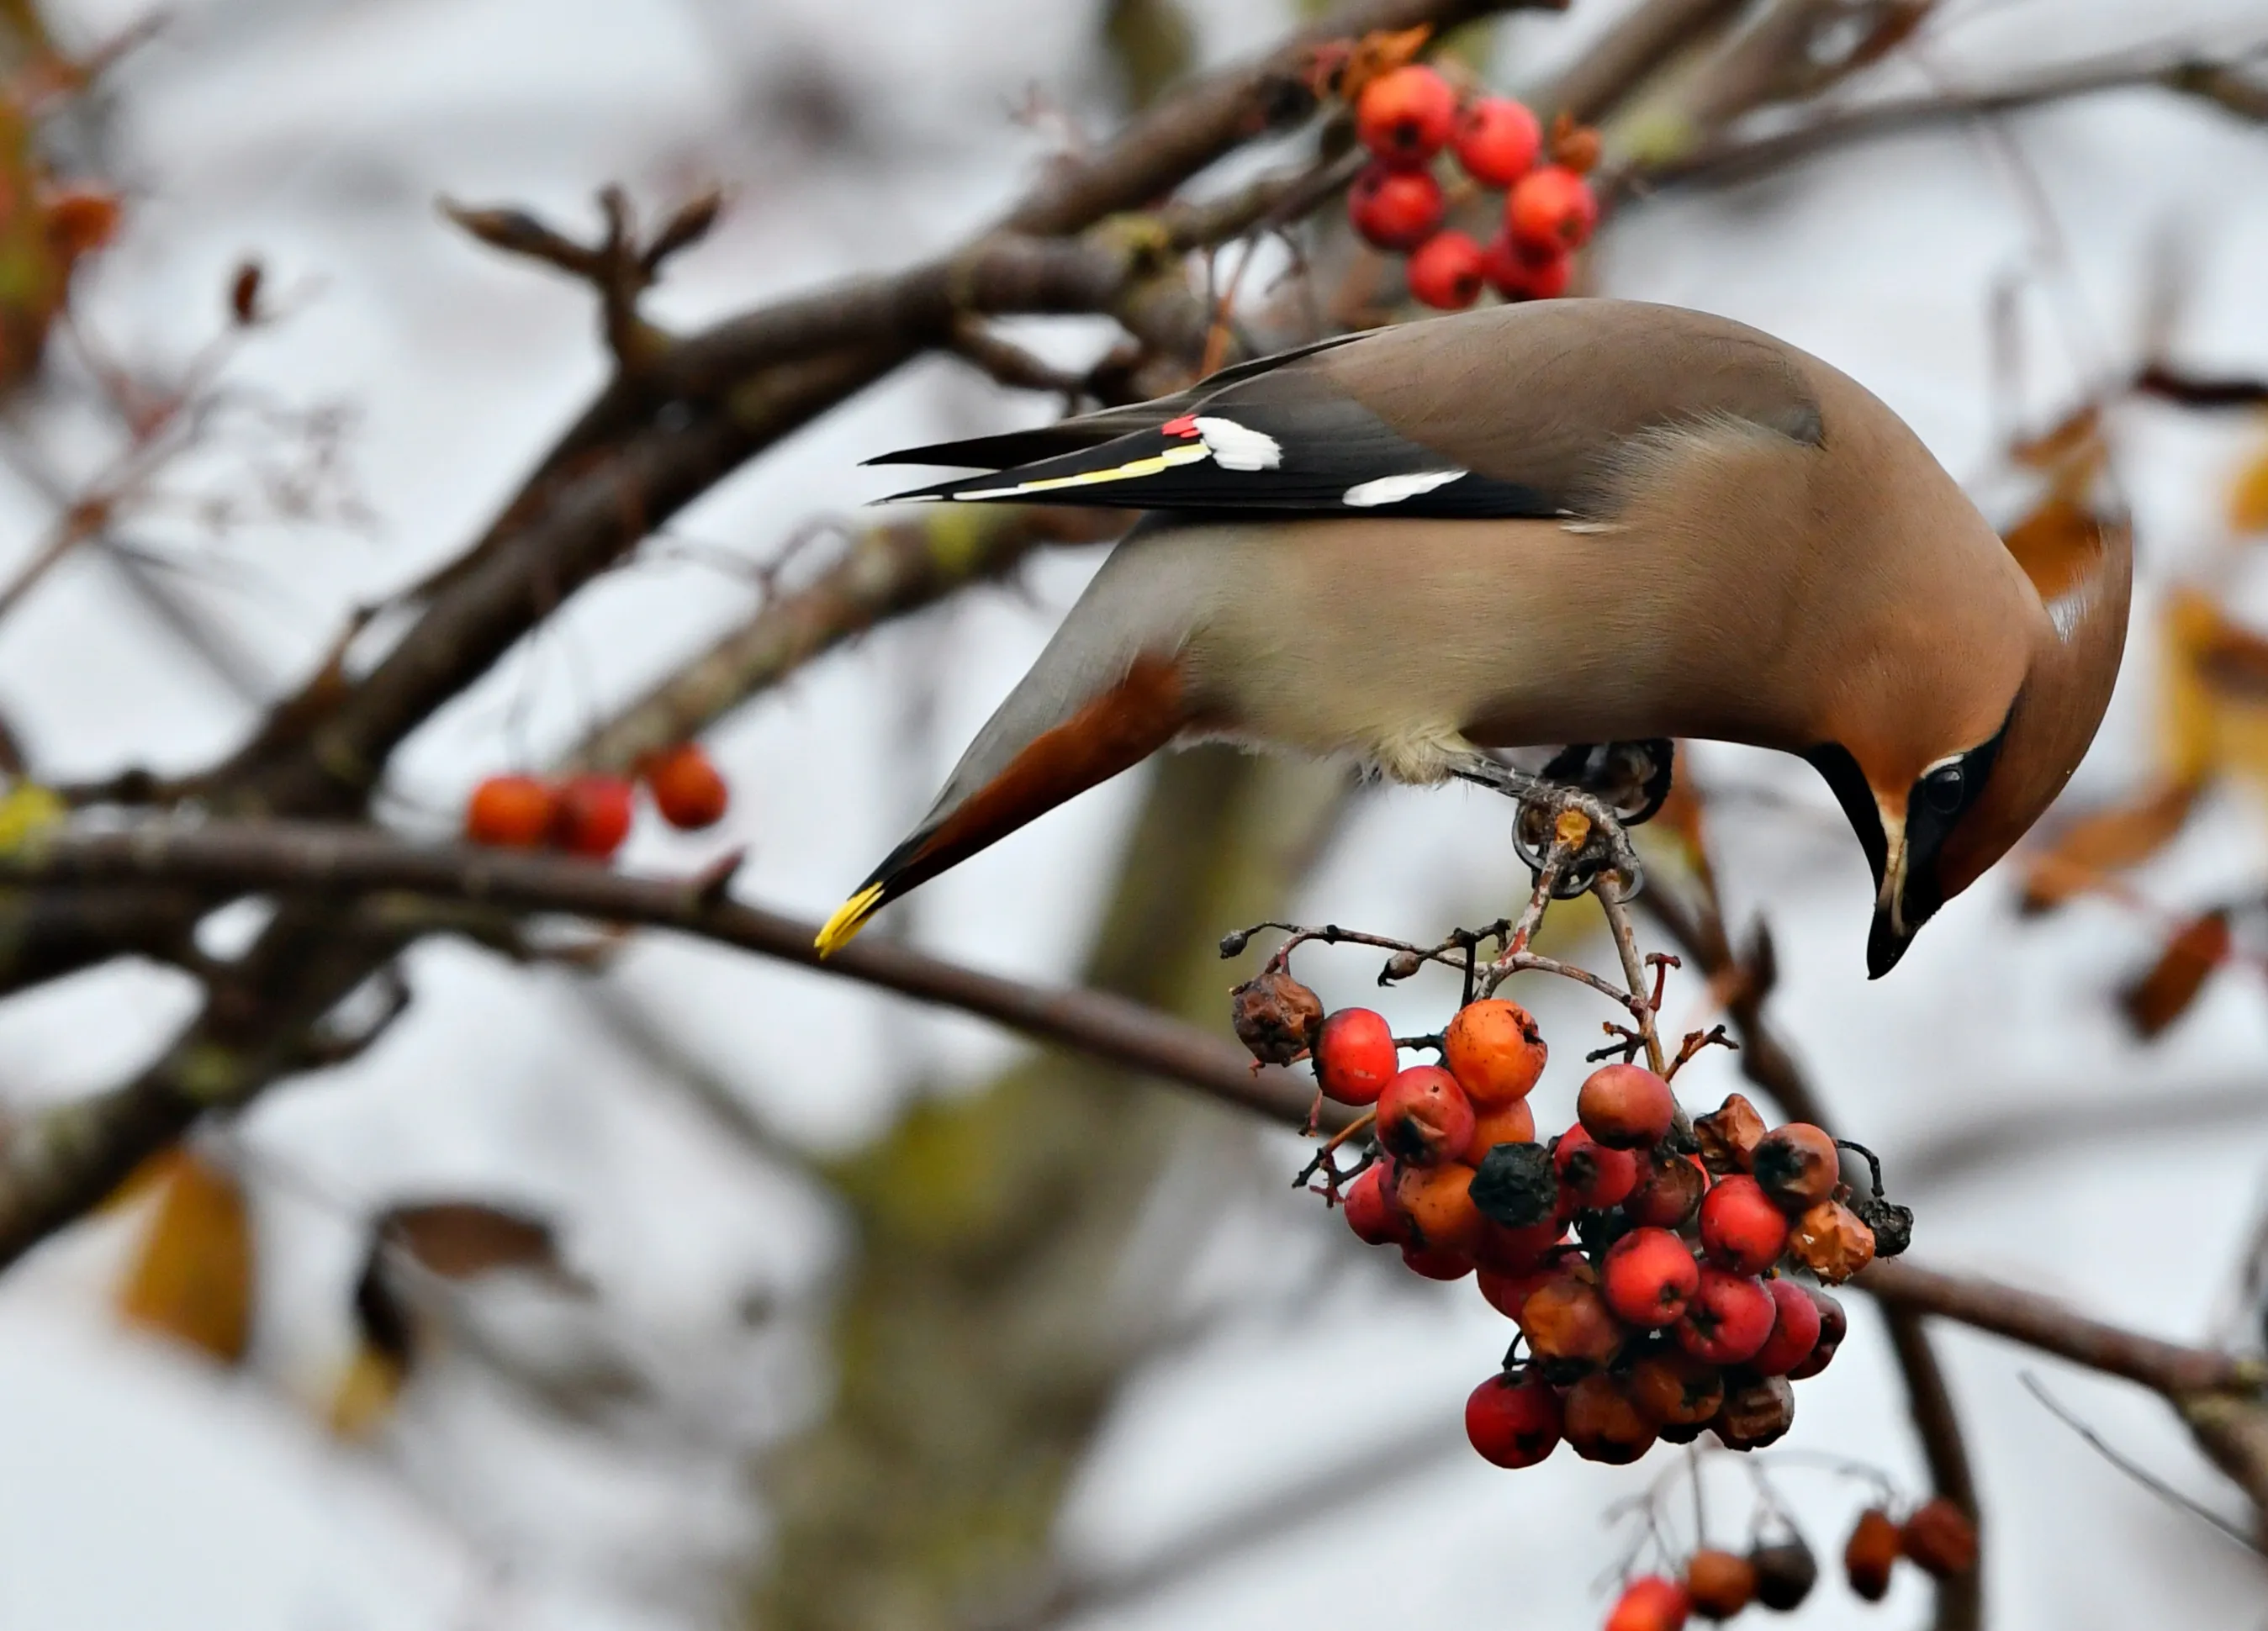 A Waxwing perched in a tree laden with berries, it is pecking at some of them. 